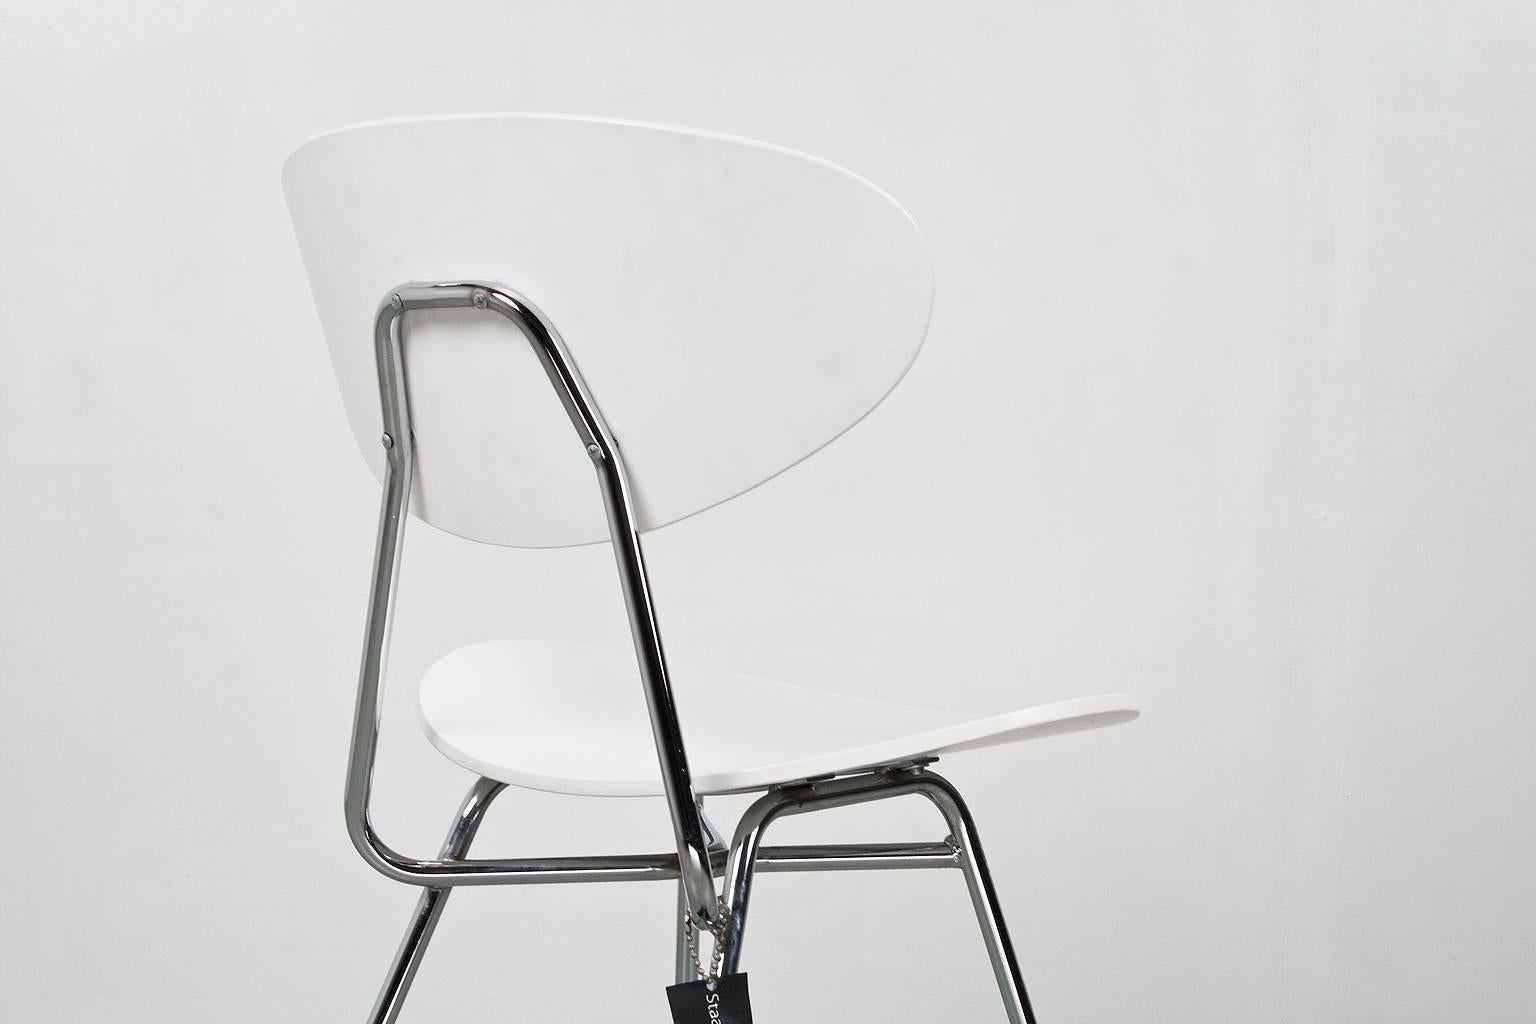 Metal Dining or Office Chair Re-Edition Dutch Modernist Design by Rob Parry, 1955 For Sale